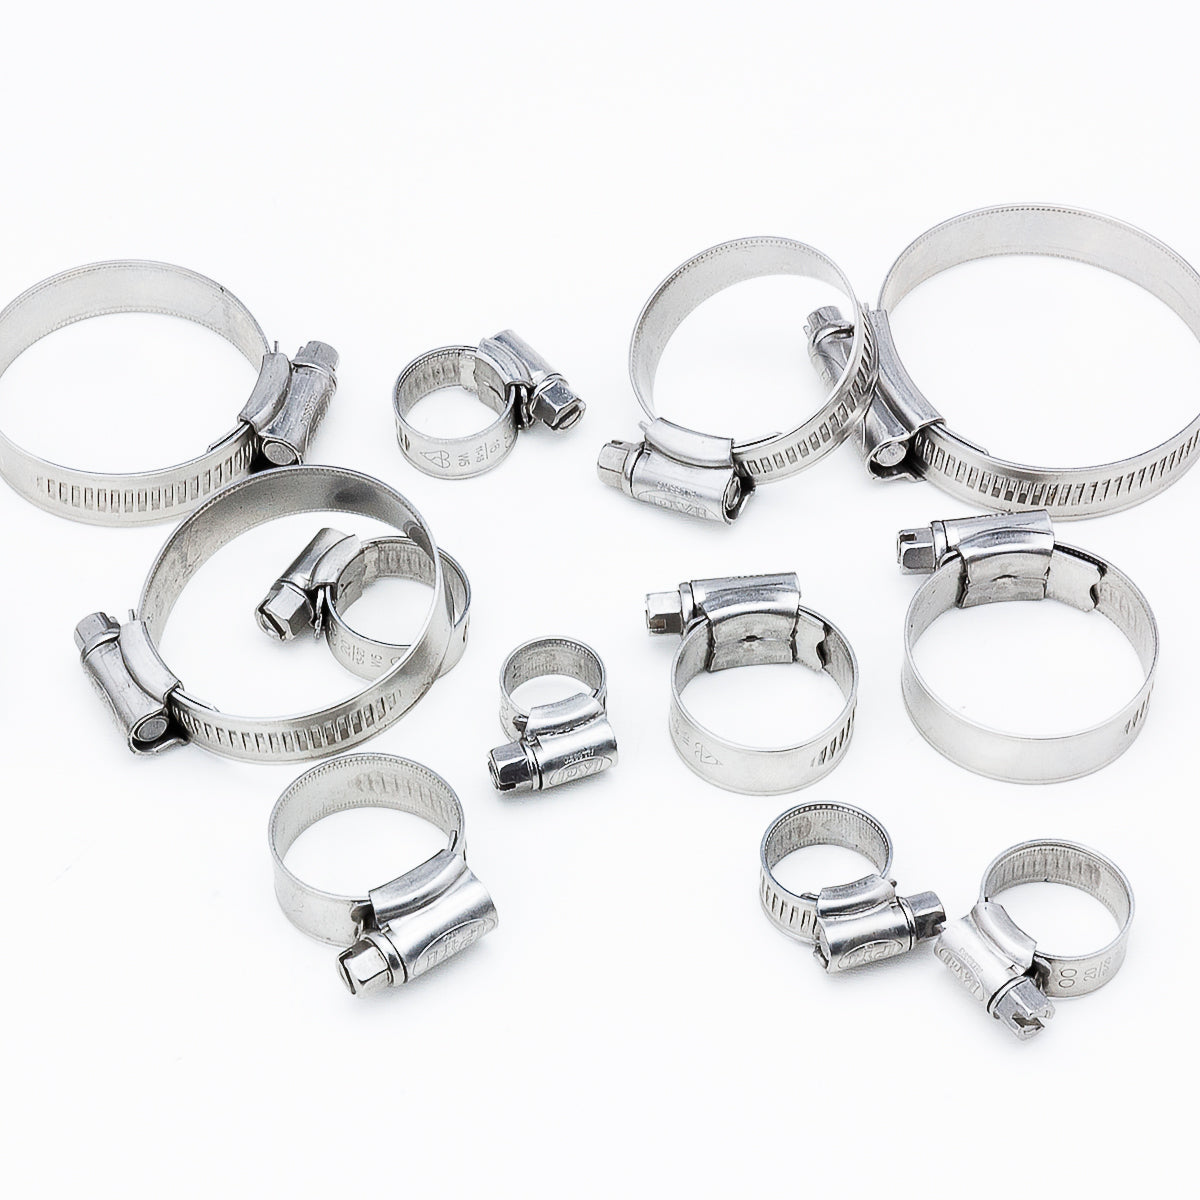 Hose Clamps - Stainless Steel Hose Clamps